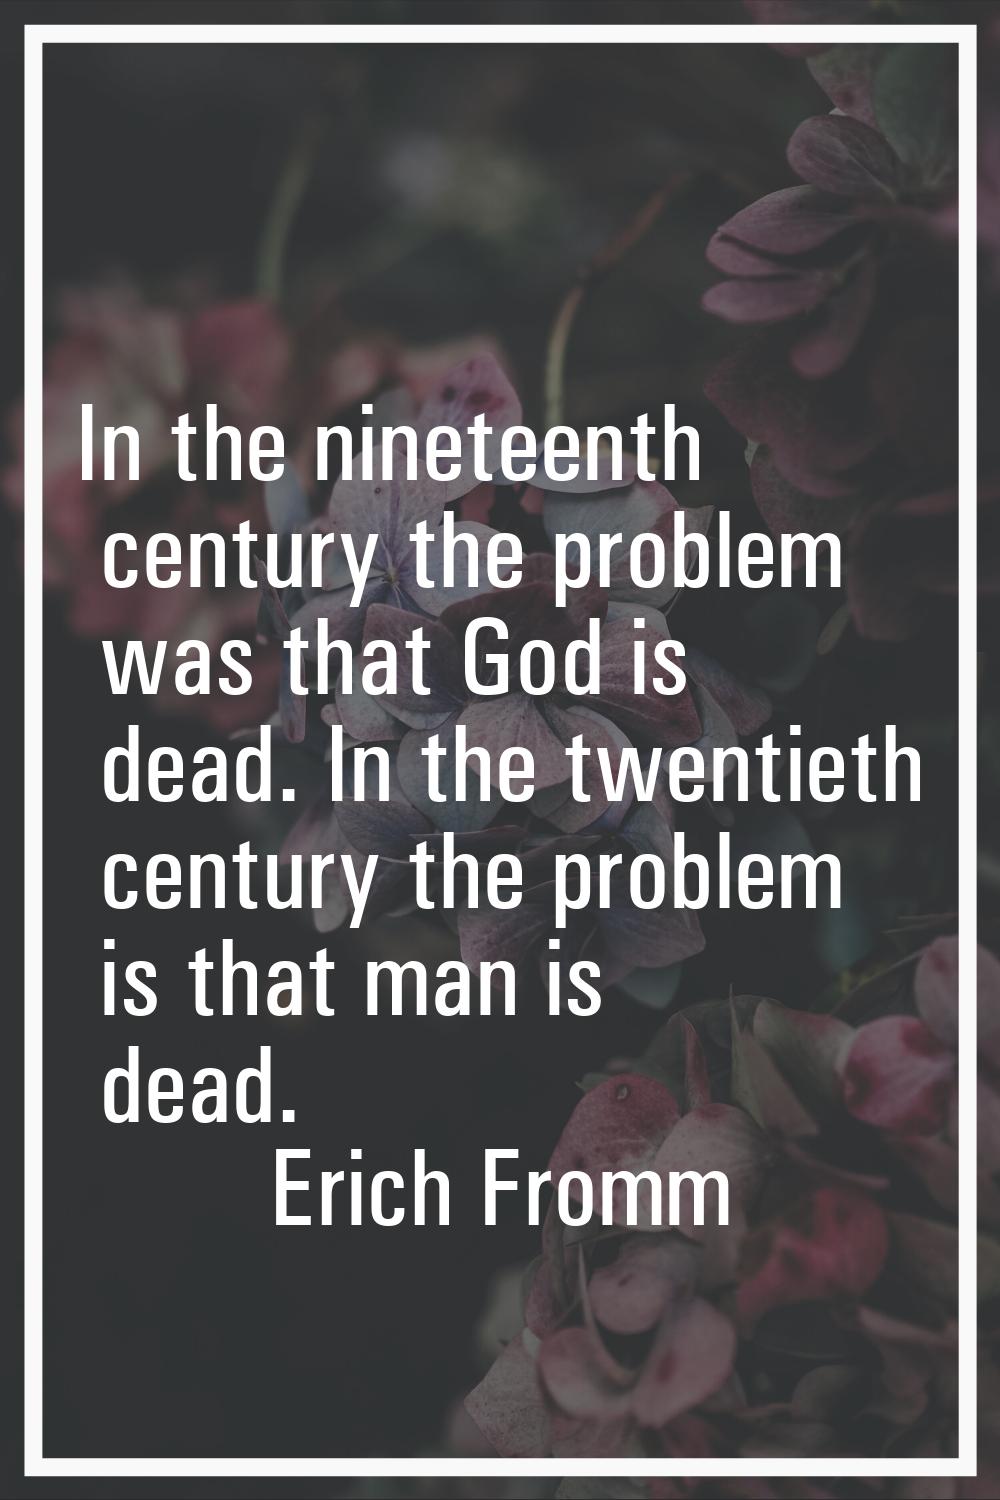 In the nineteenth century the problem was that God is dead. In the twentieth century the problem is